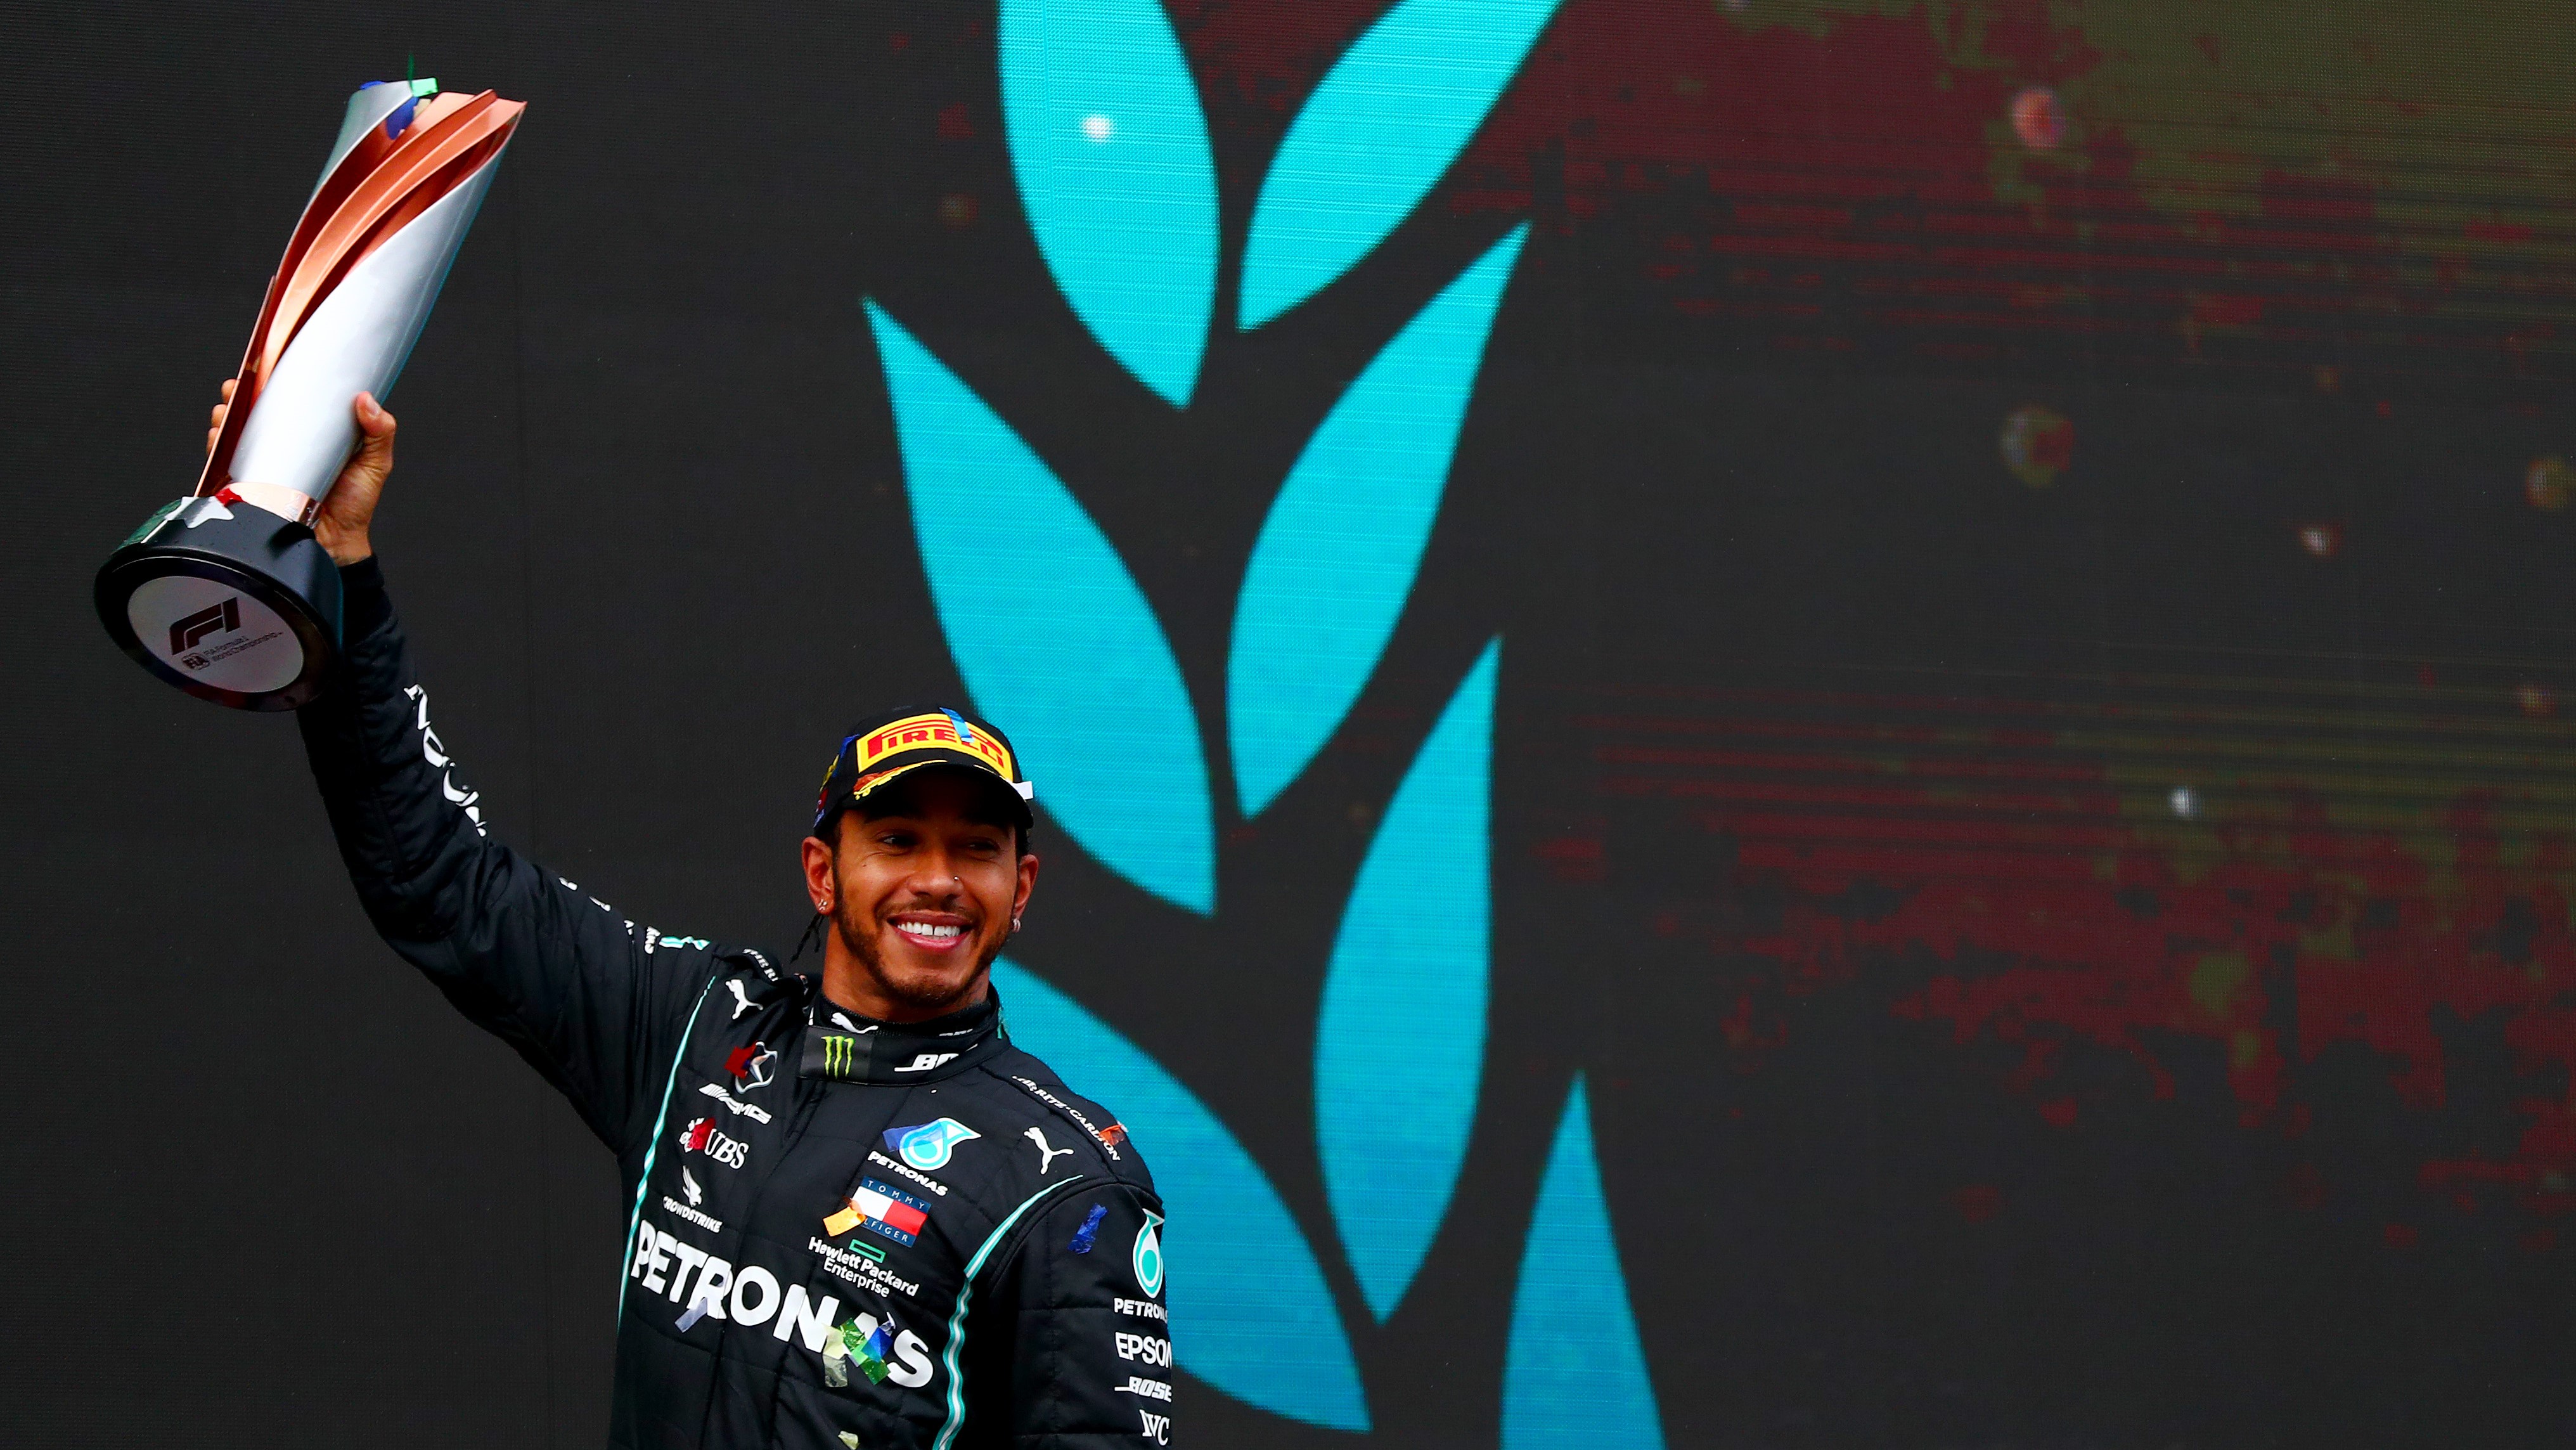 How to watch F1 2021 live stream every Grand Prix from anywhere